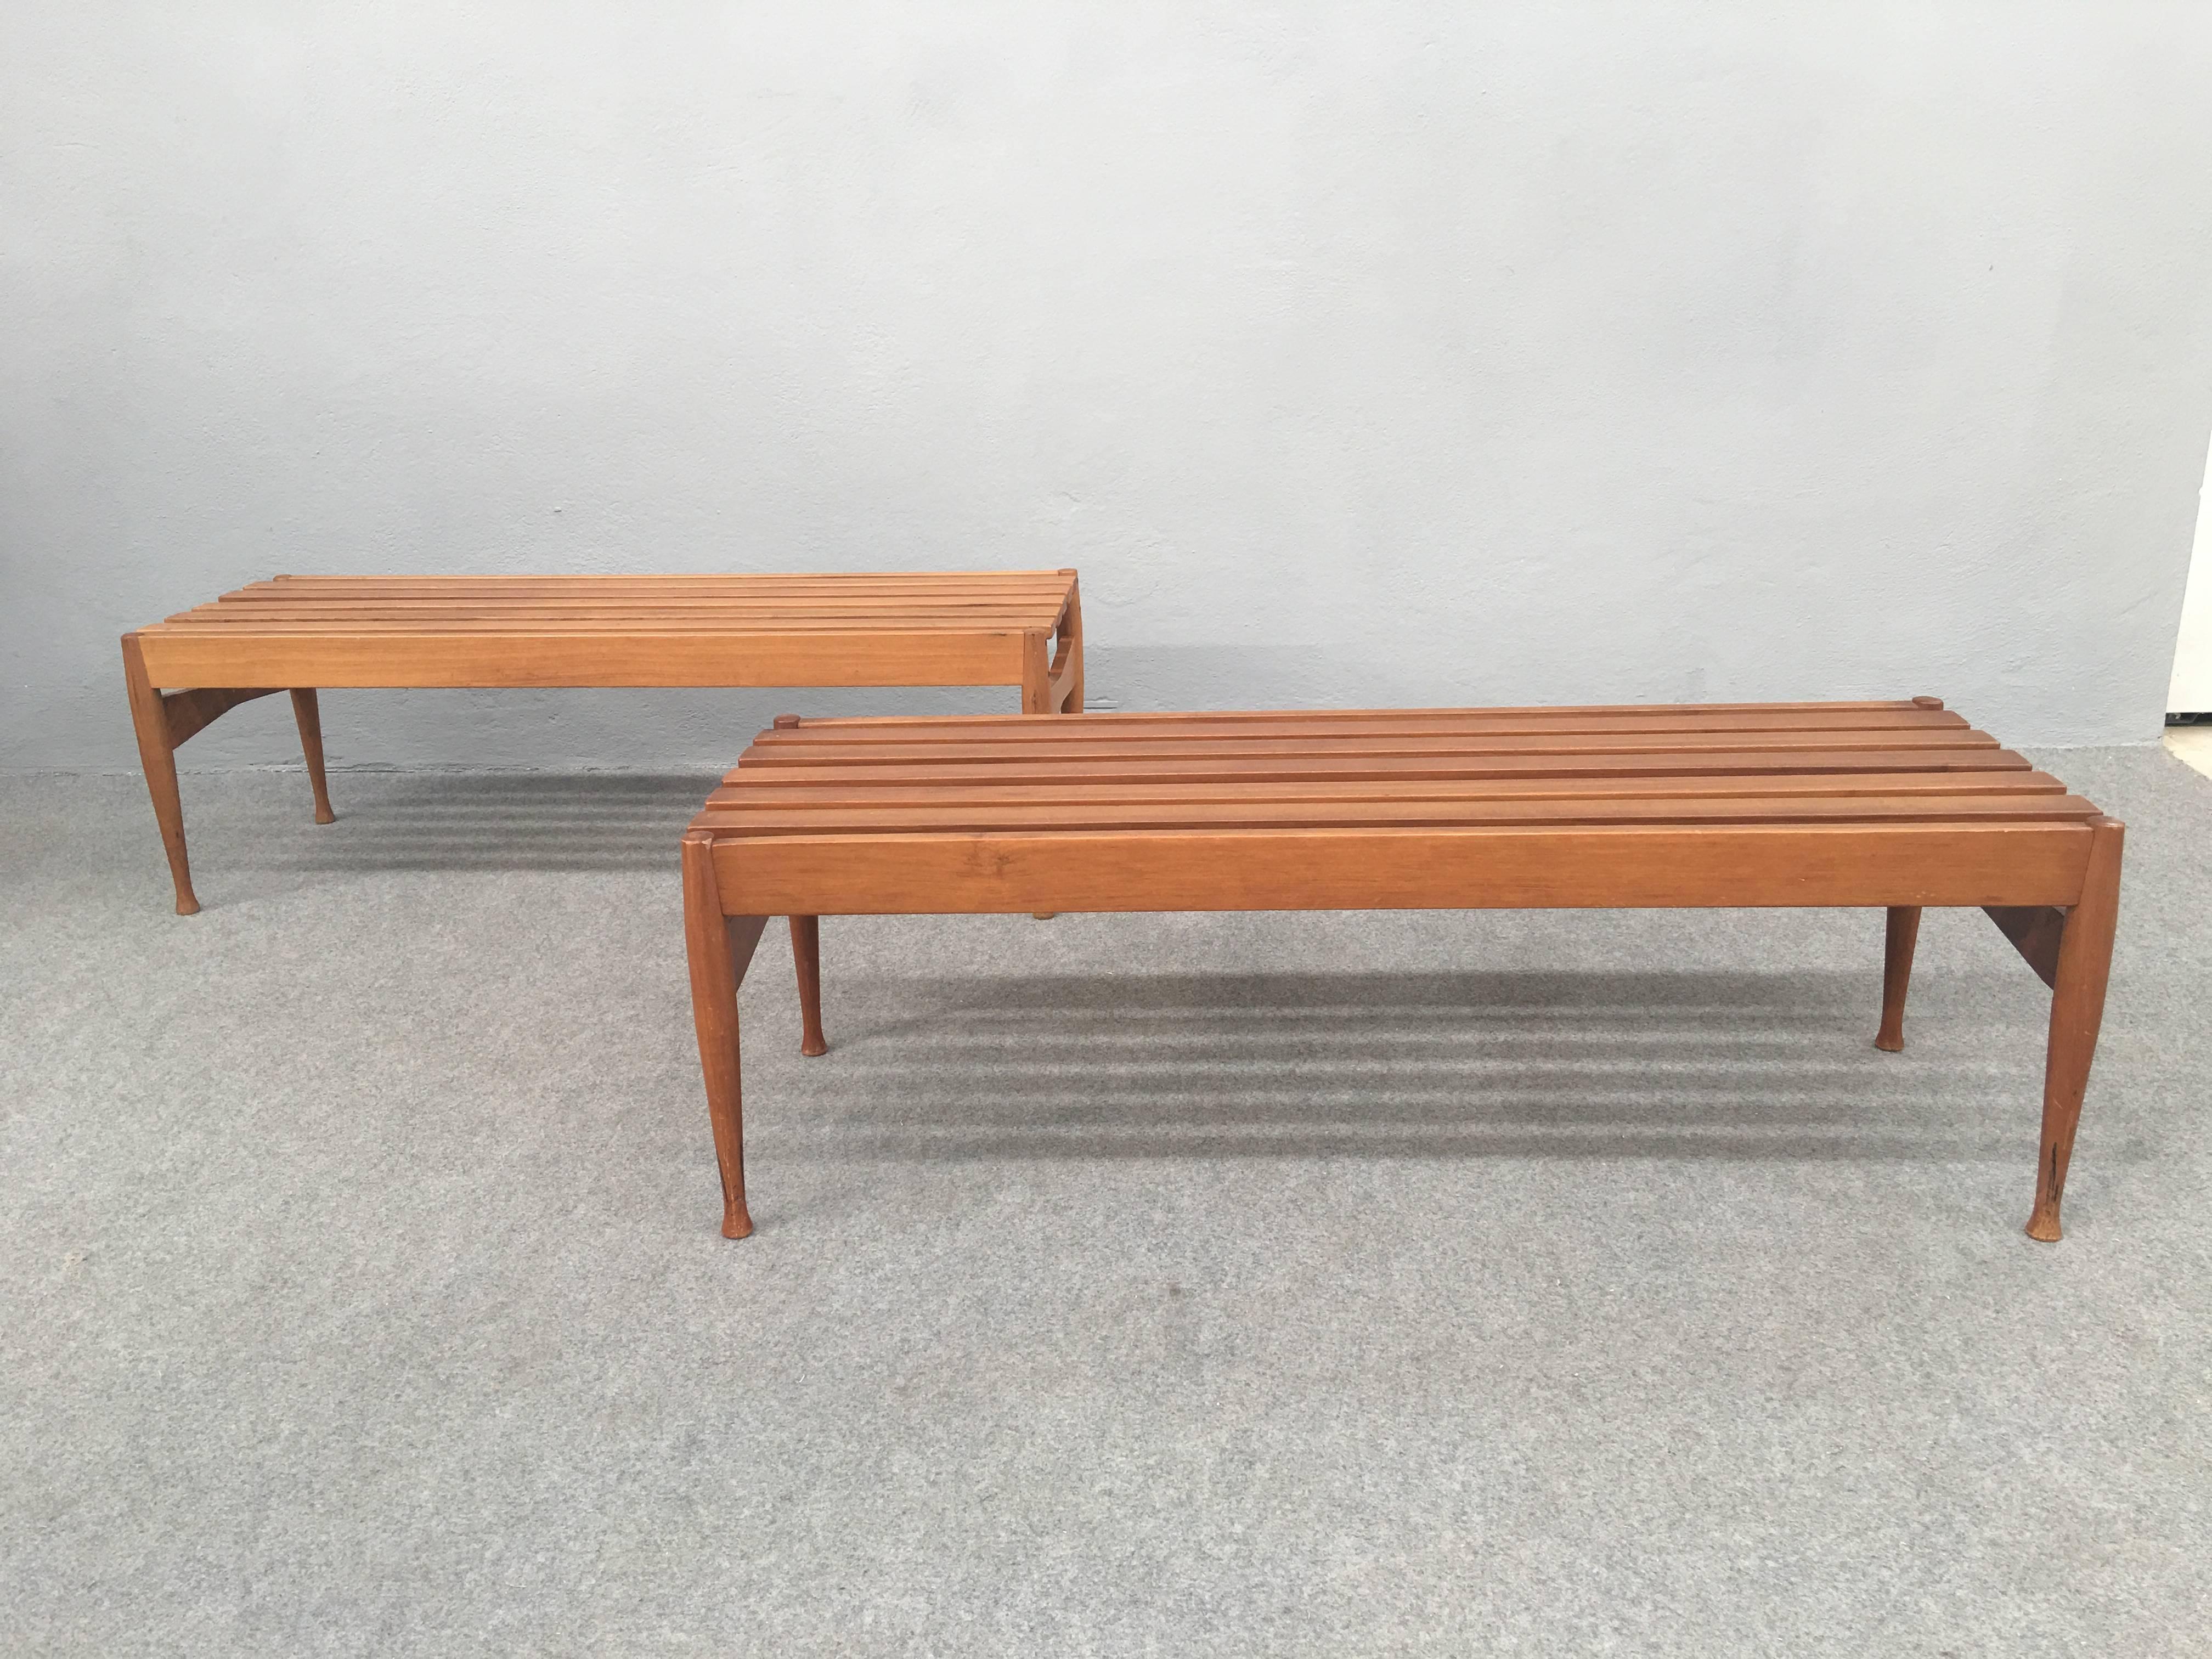 Extraordinary pair of benches by Reguitti, design attributed to Gio Ponti, signed, circa 1958